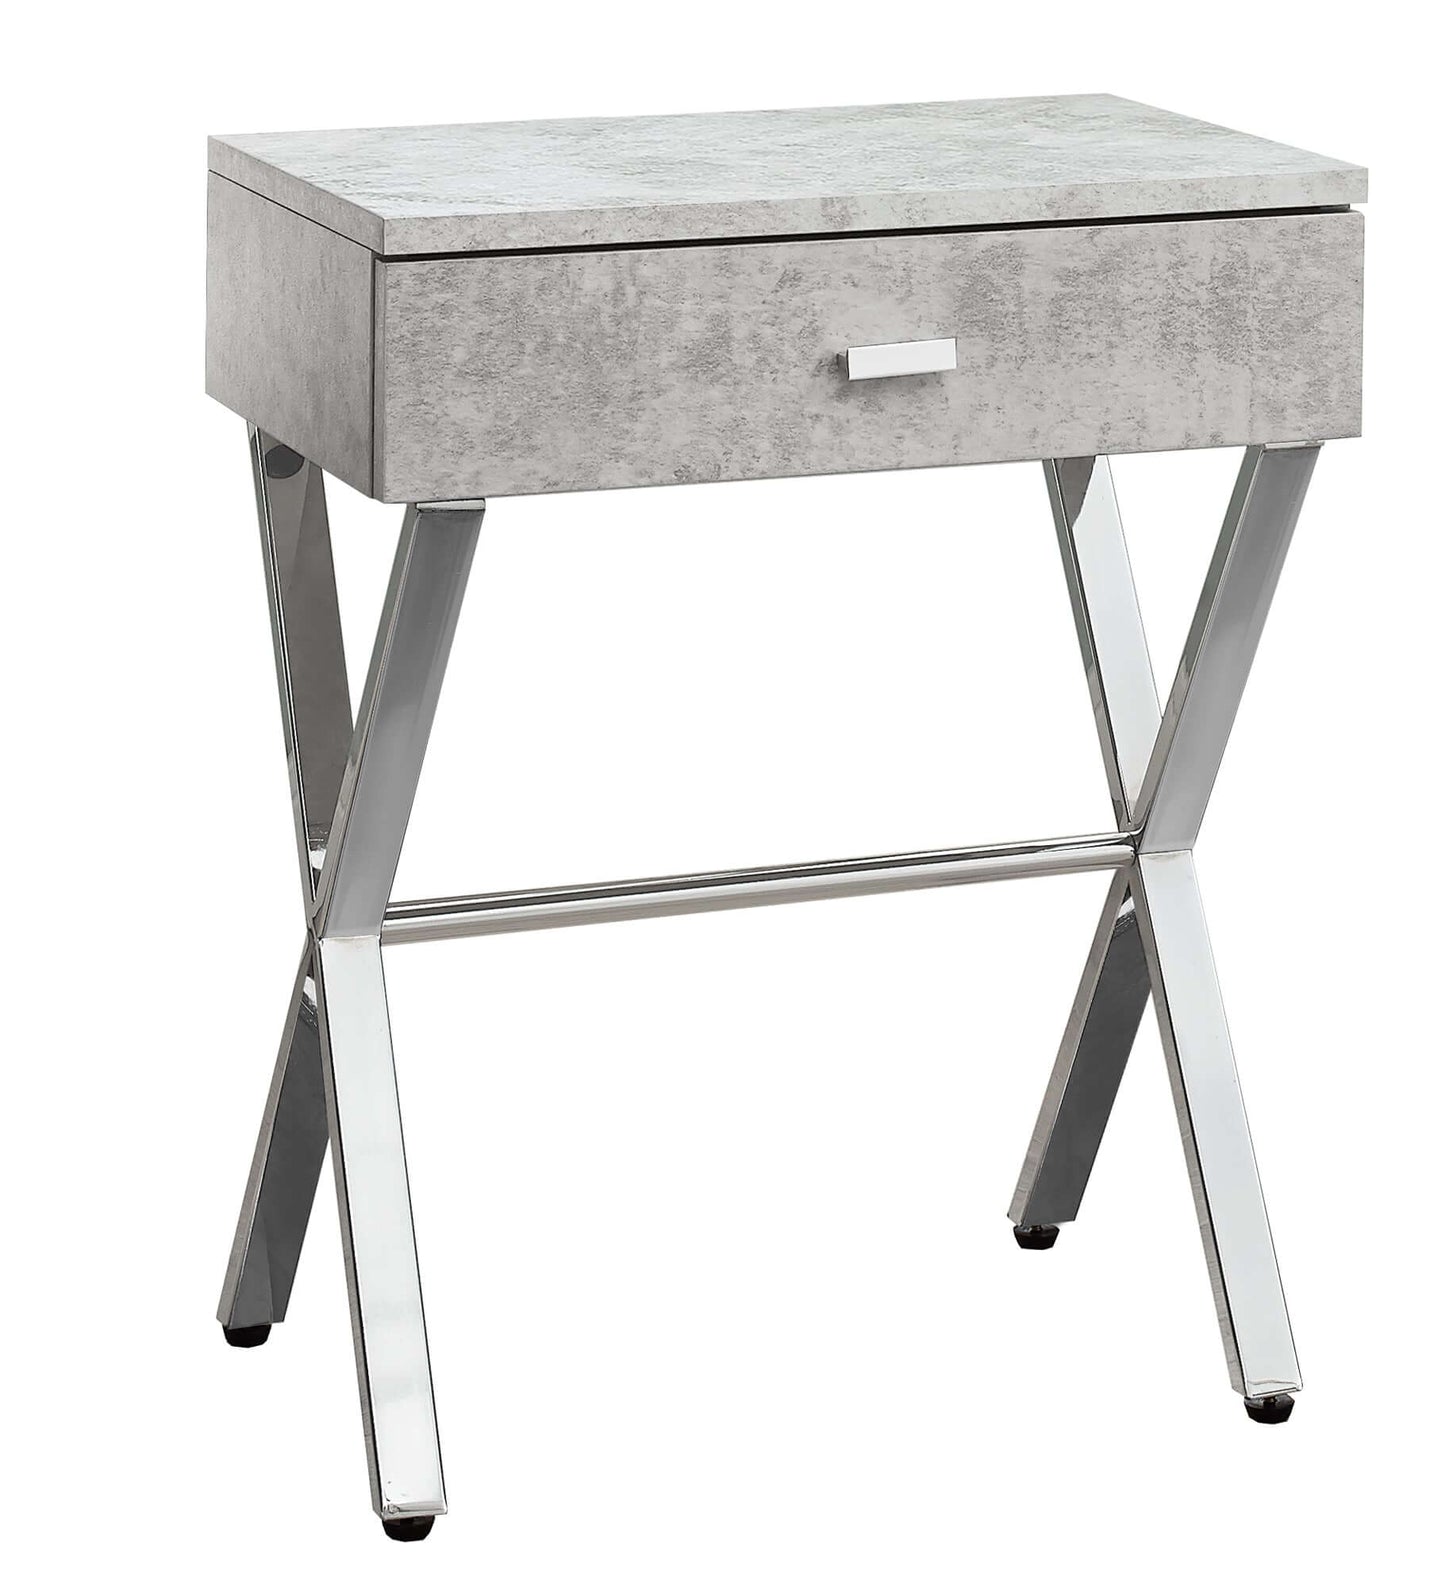 Monarch Specialties - Modern Nightstand in Grey Cement Finish with Chrome Metal Frame - I 3264